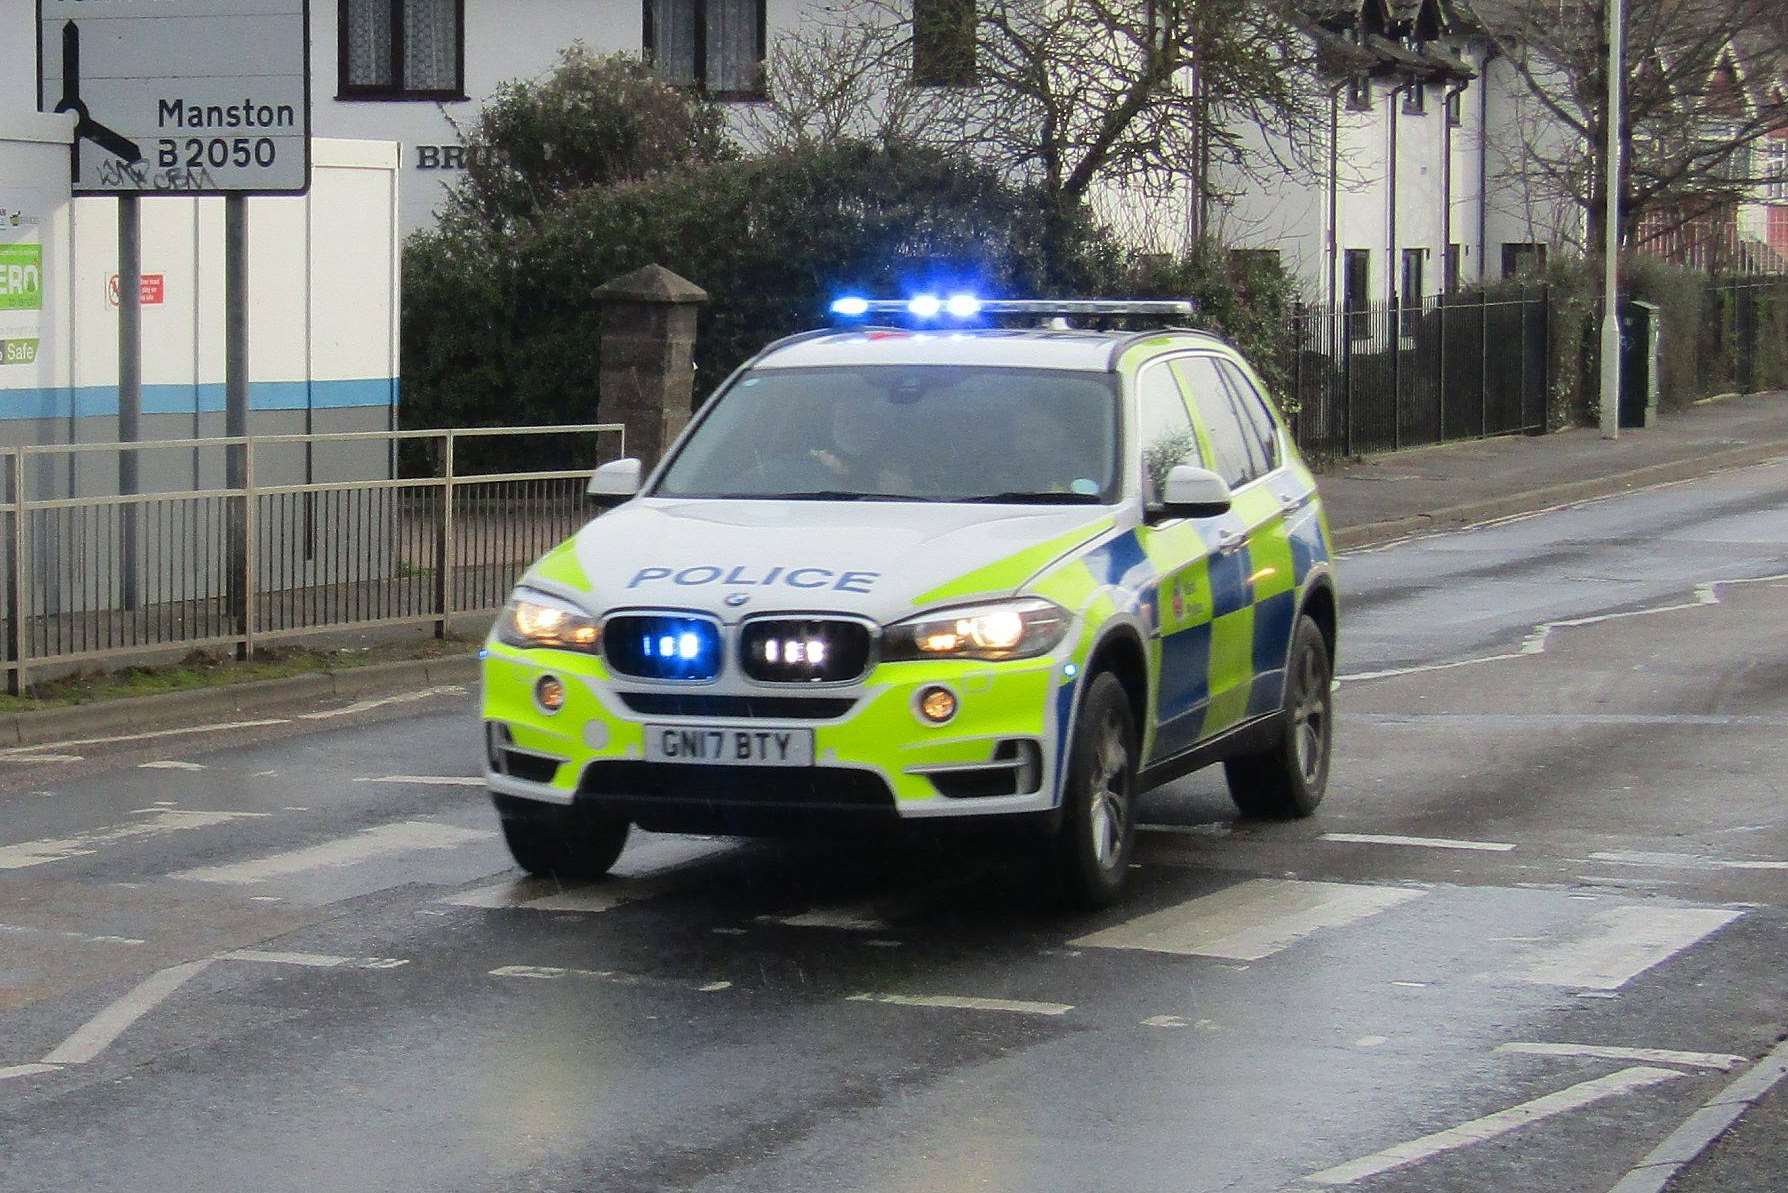 A firearms unit en route to the scene. Picture: Roger Greenaway.